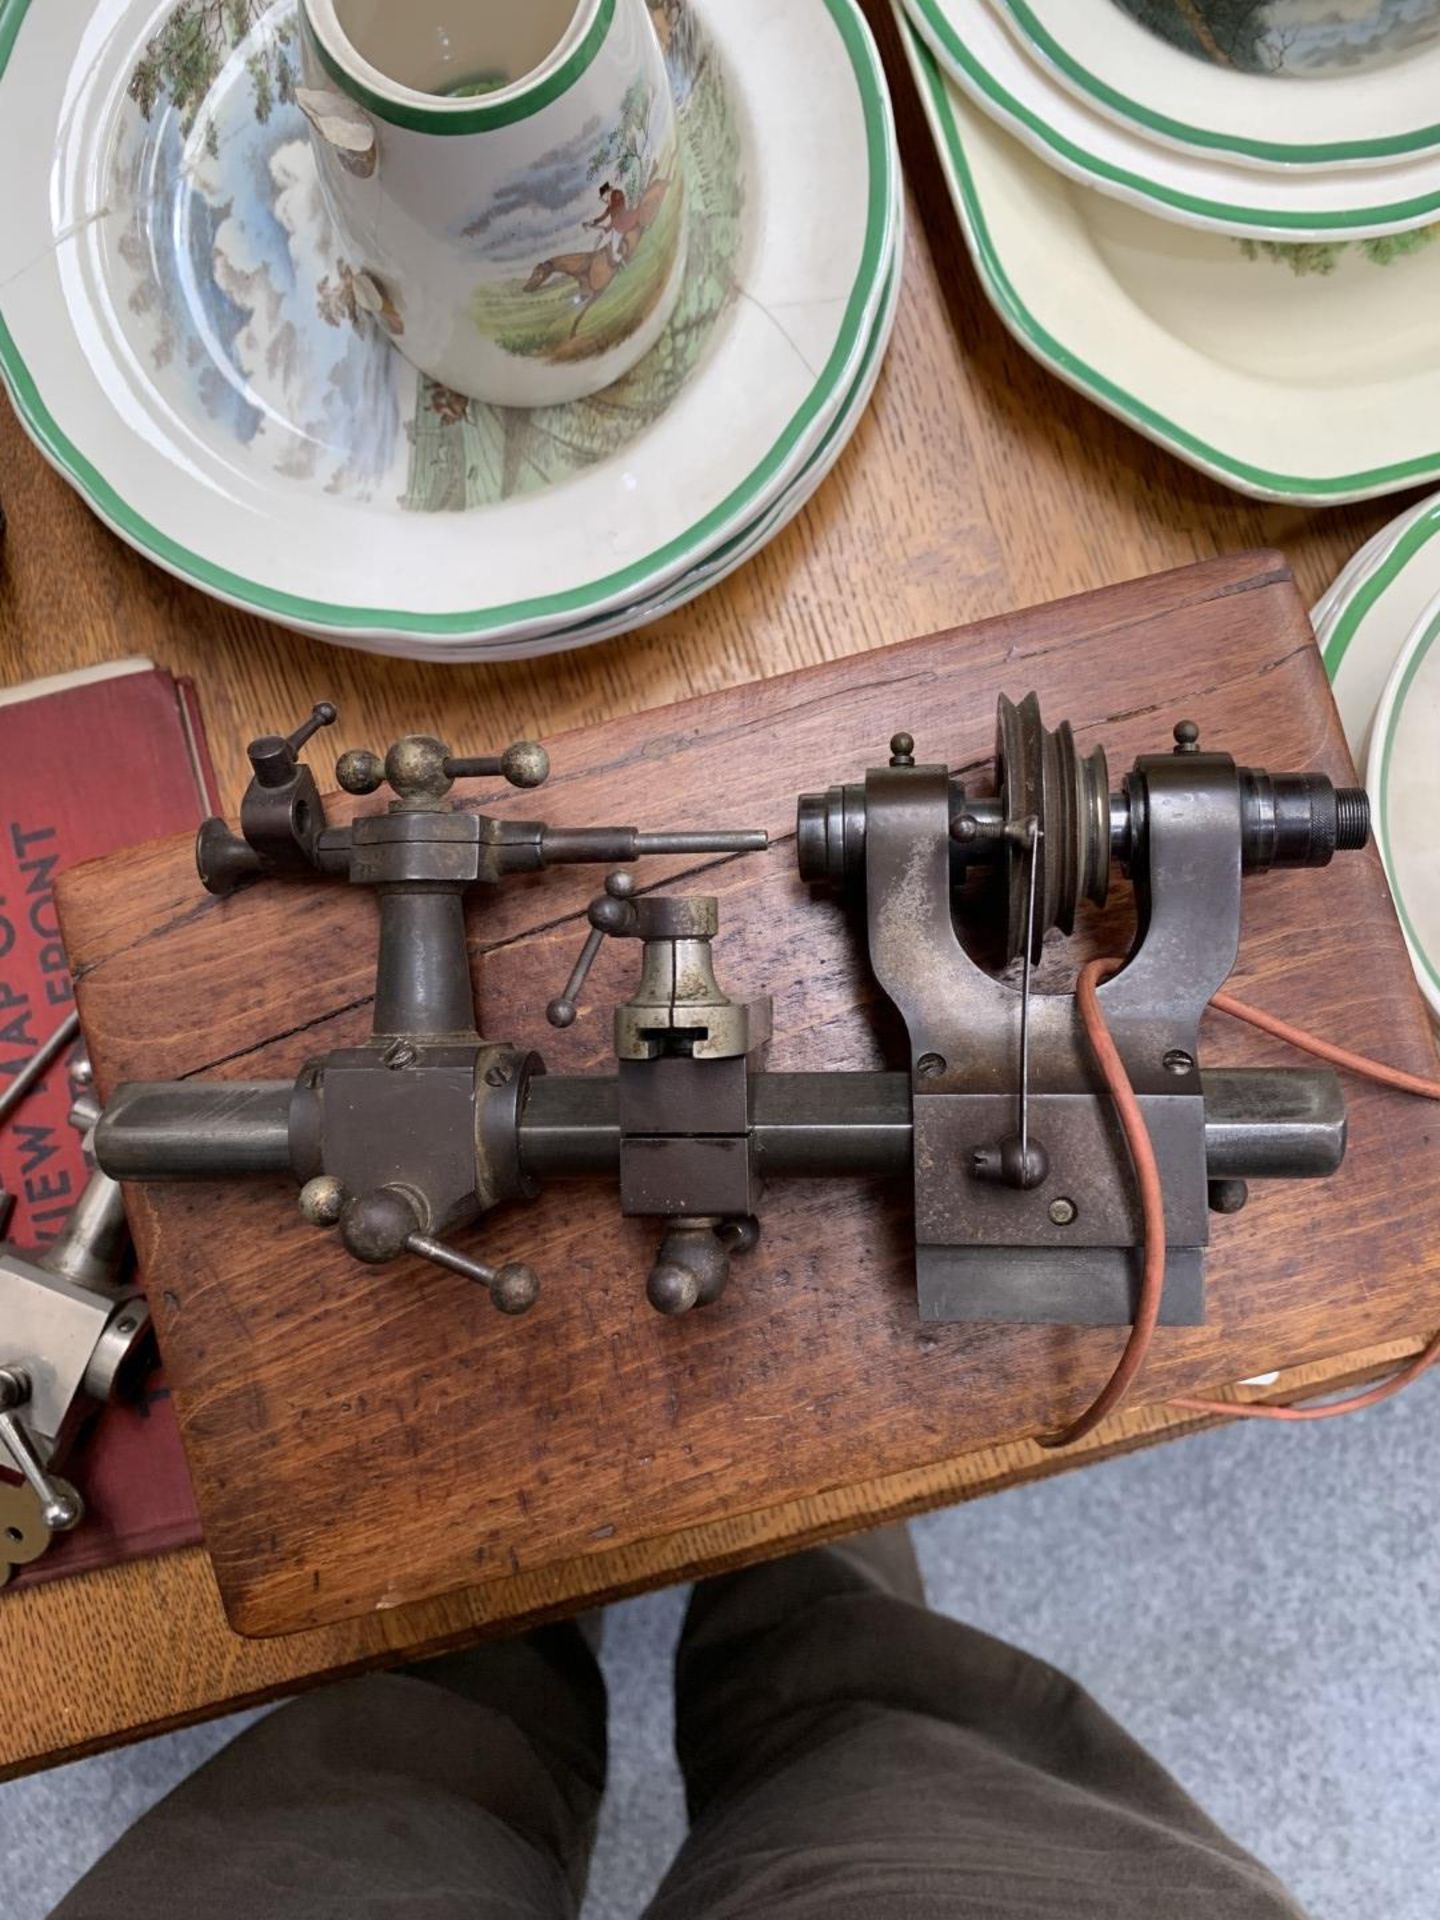 A WATCHMAKER'S LATHE AND PAIR OF SCALES - Image 2 of 6